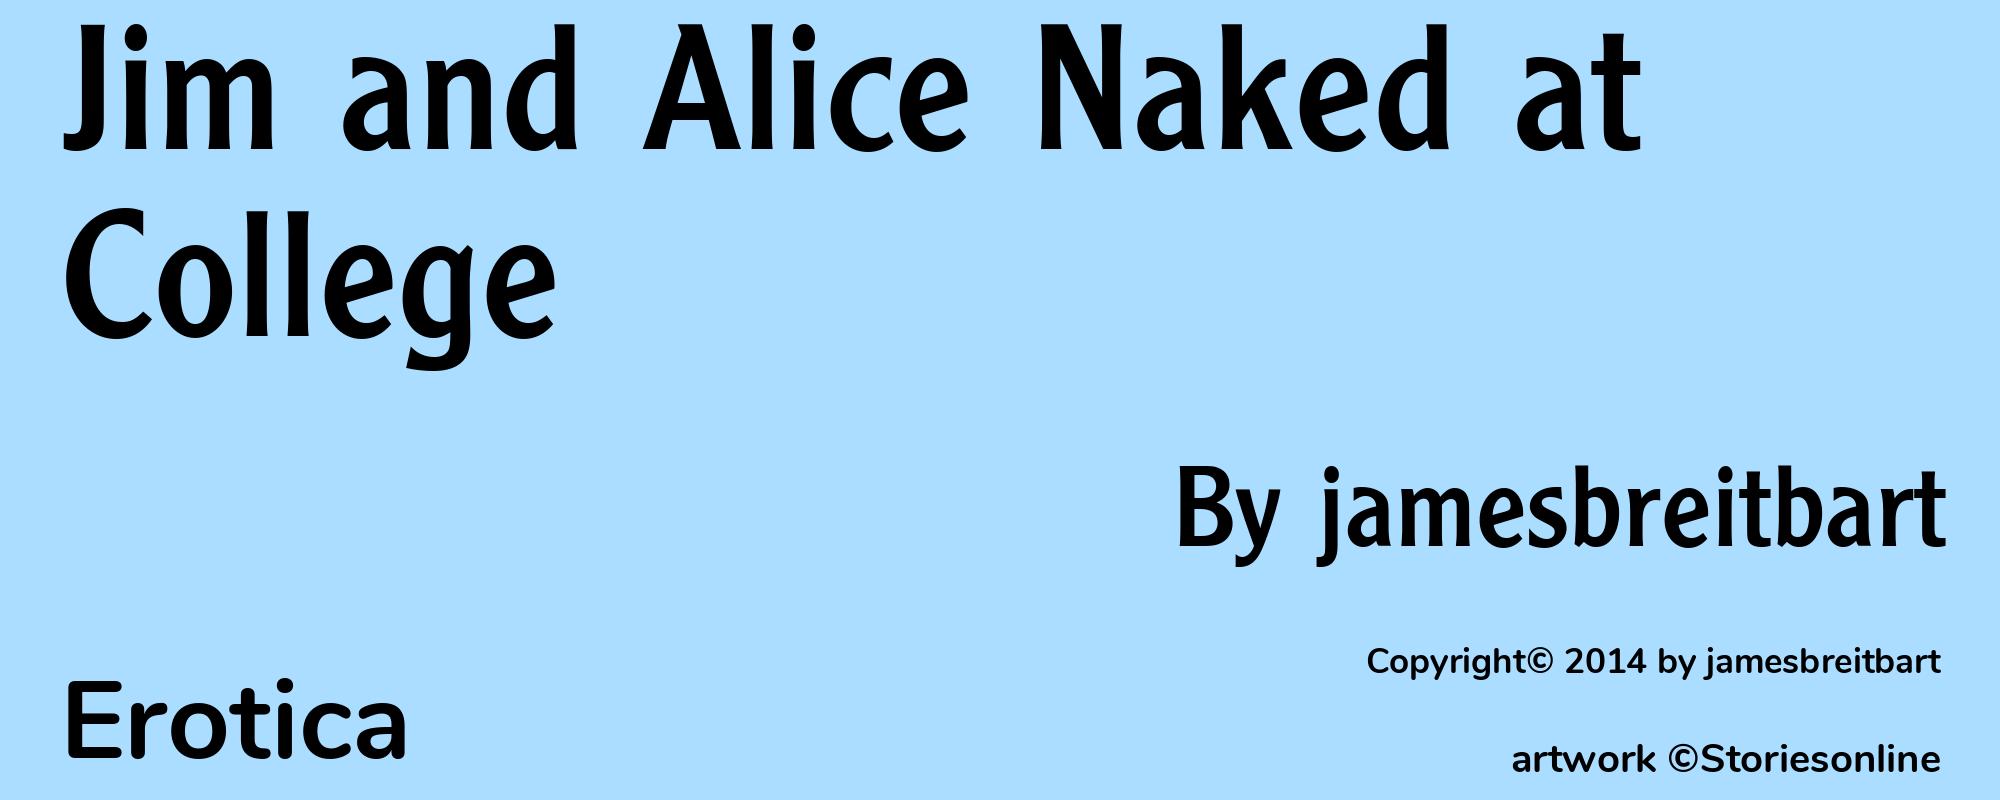 Jim and Alice Naked at College - Cover